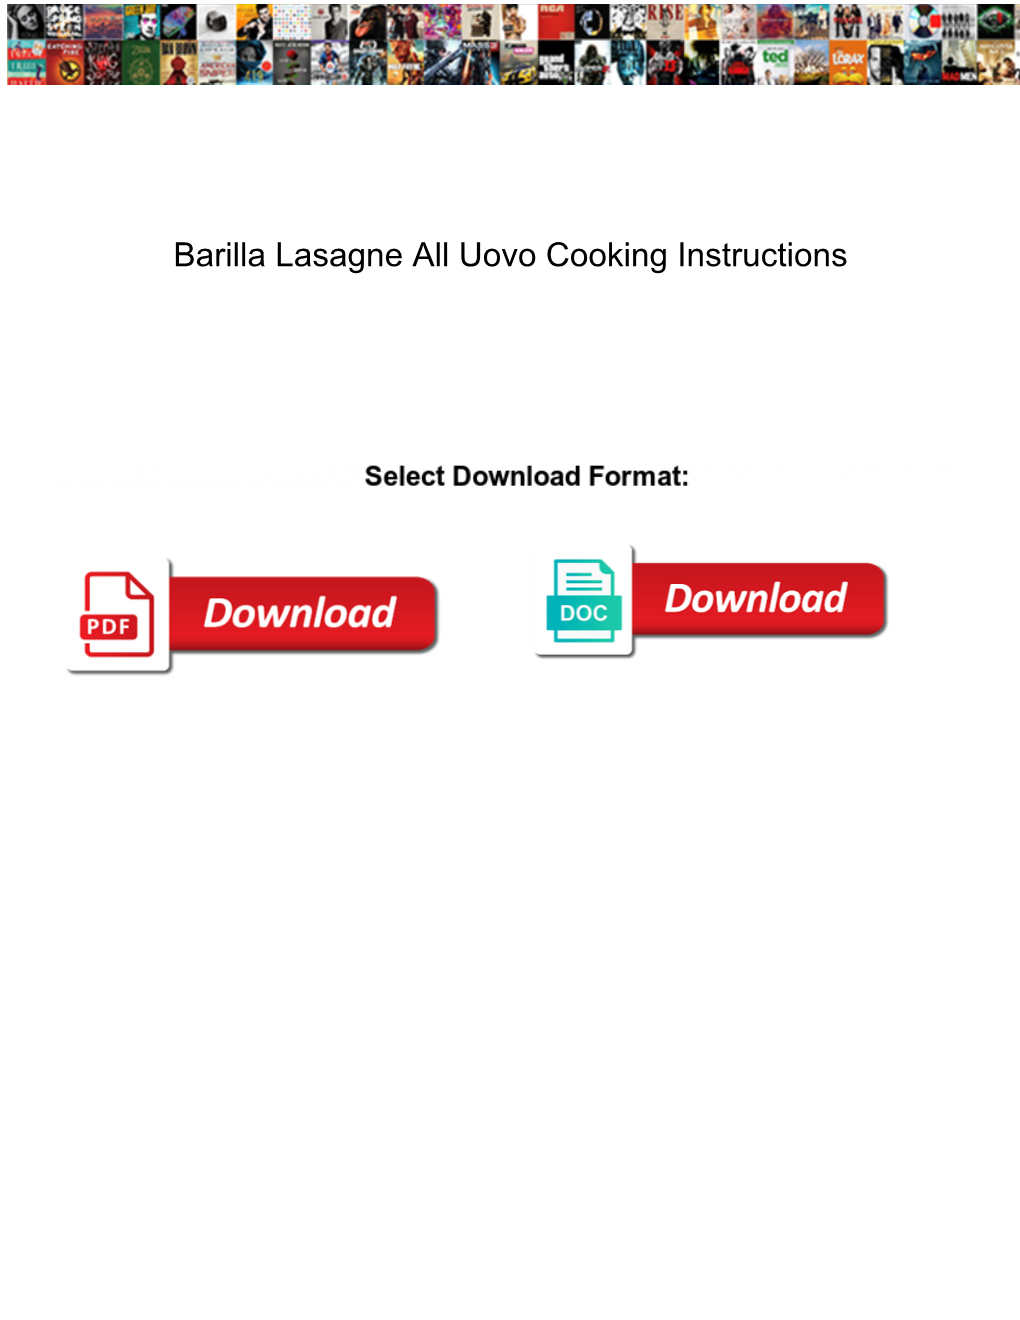 Barilla Lasagne All Uovo Cooking Instructions